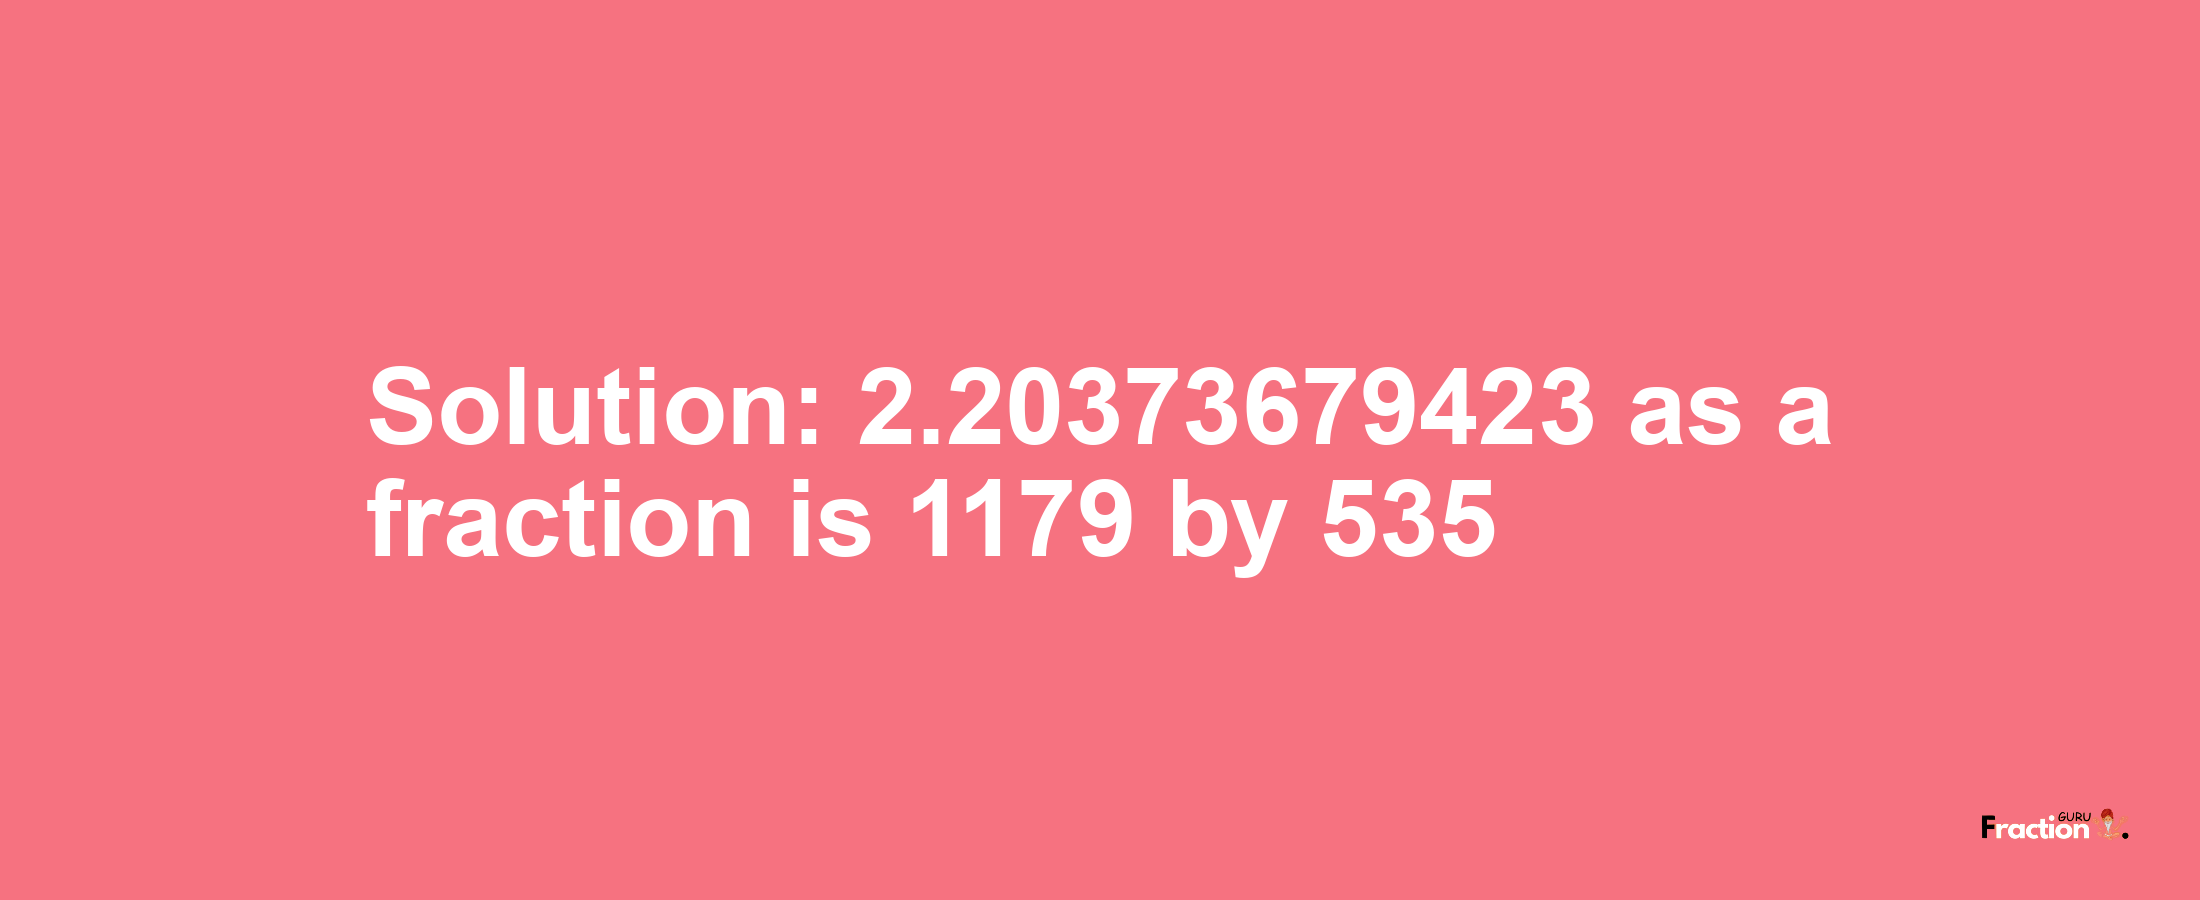 Solution:2.20373679423 as a fraction is 1179/535